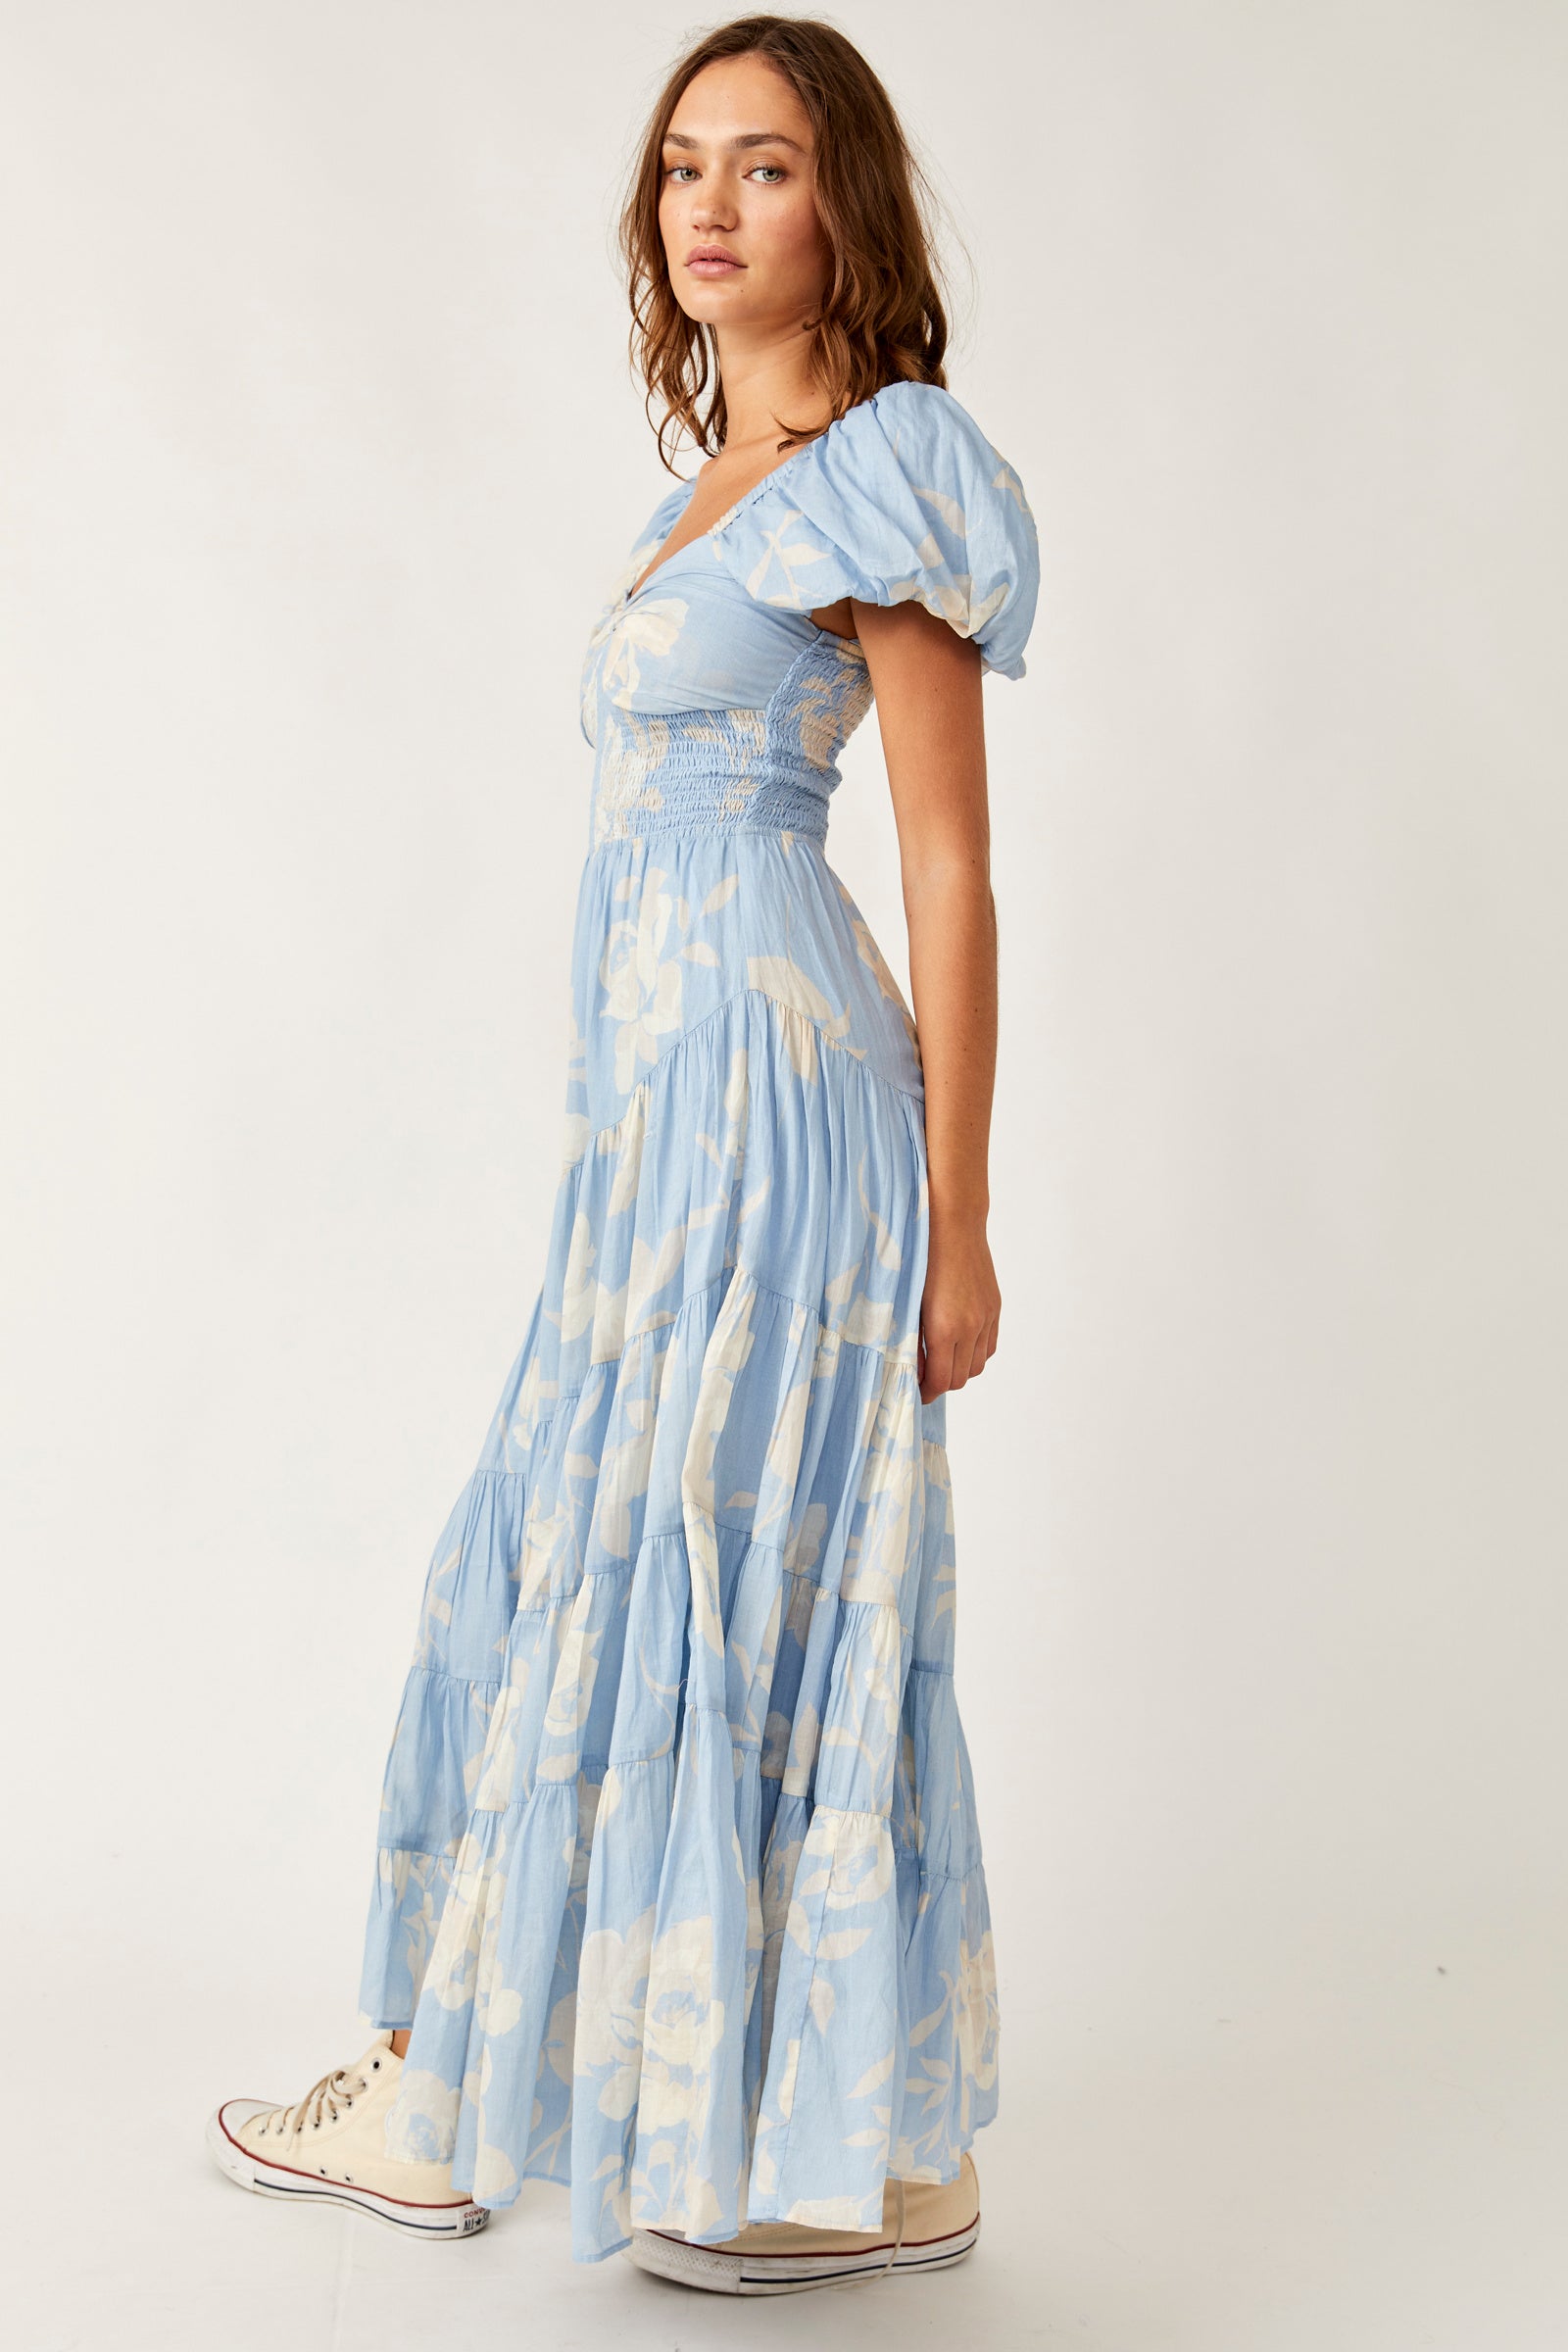 FREE PEOPLE SUNDRENCHED MIDI DRESS IN SKY COMBO